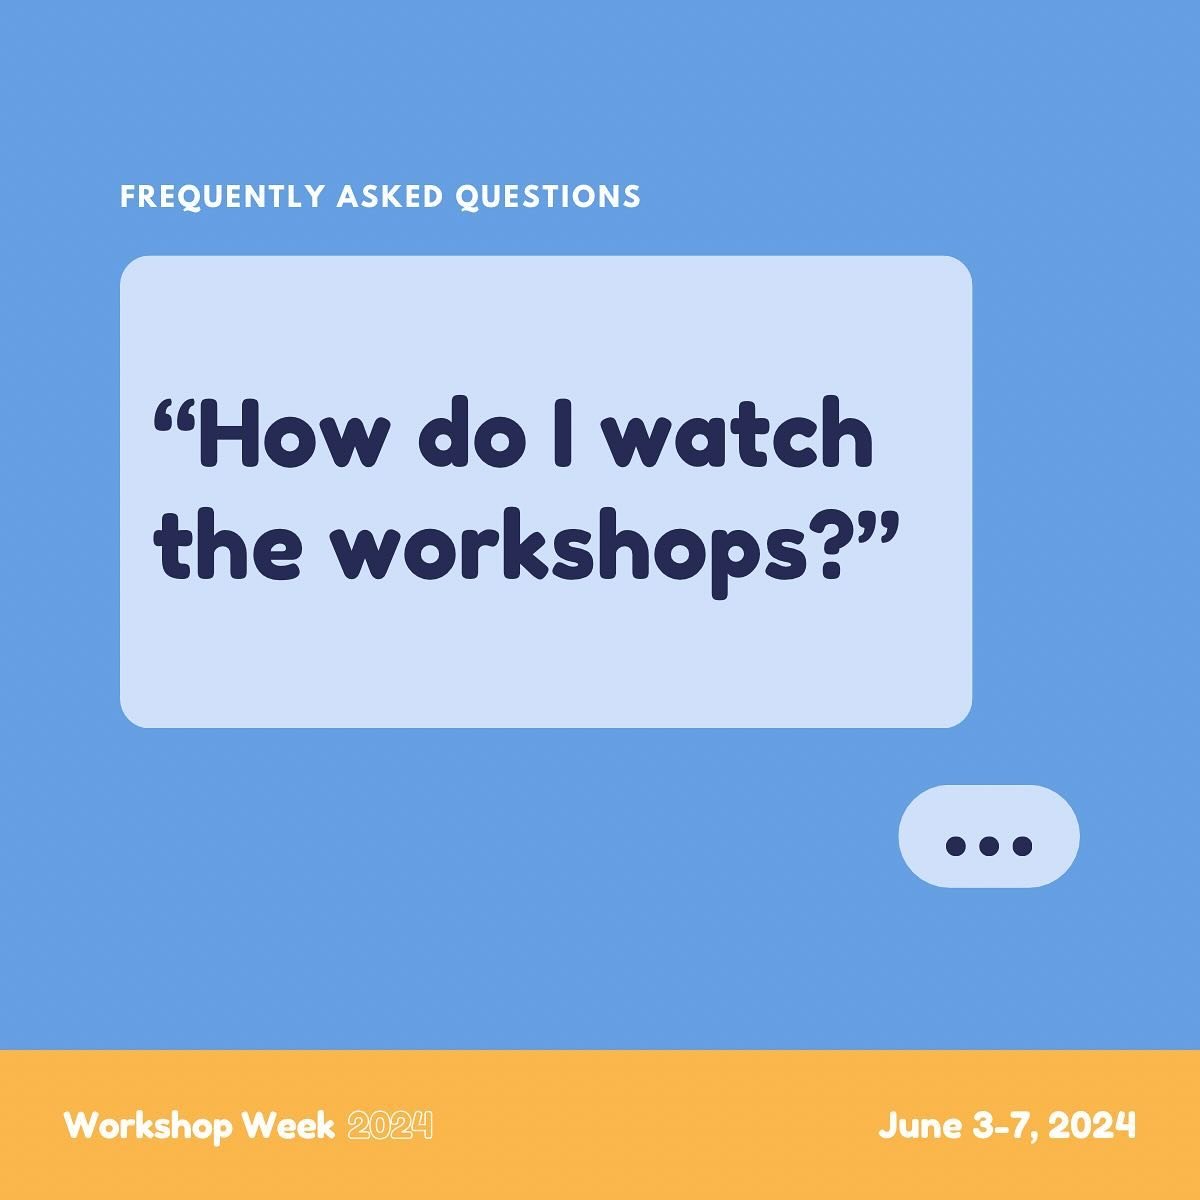 &ldquo;Do I have to log in somewhere special to see the workshops?&rdquo;

Everything will be on the Workshop Week website when the event starts.

All you need to do is make sure you&rsquo;re signed up at www.workshopweek.co , and everything you need